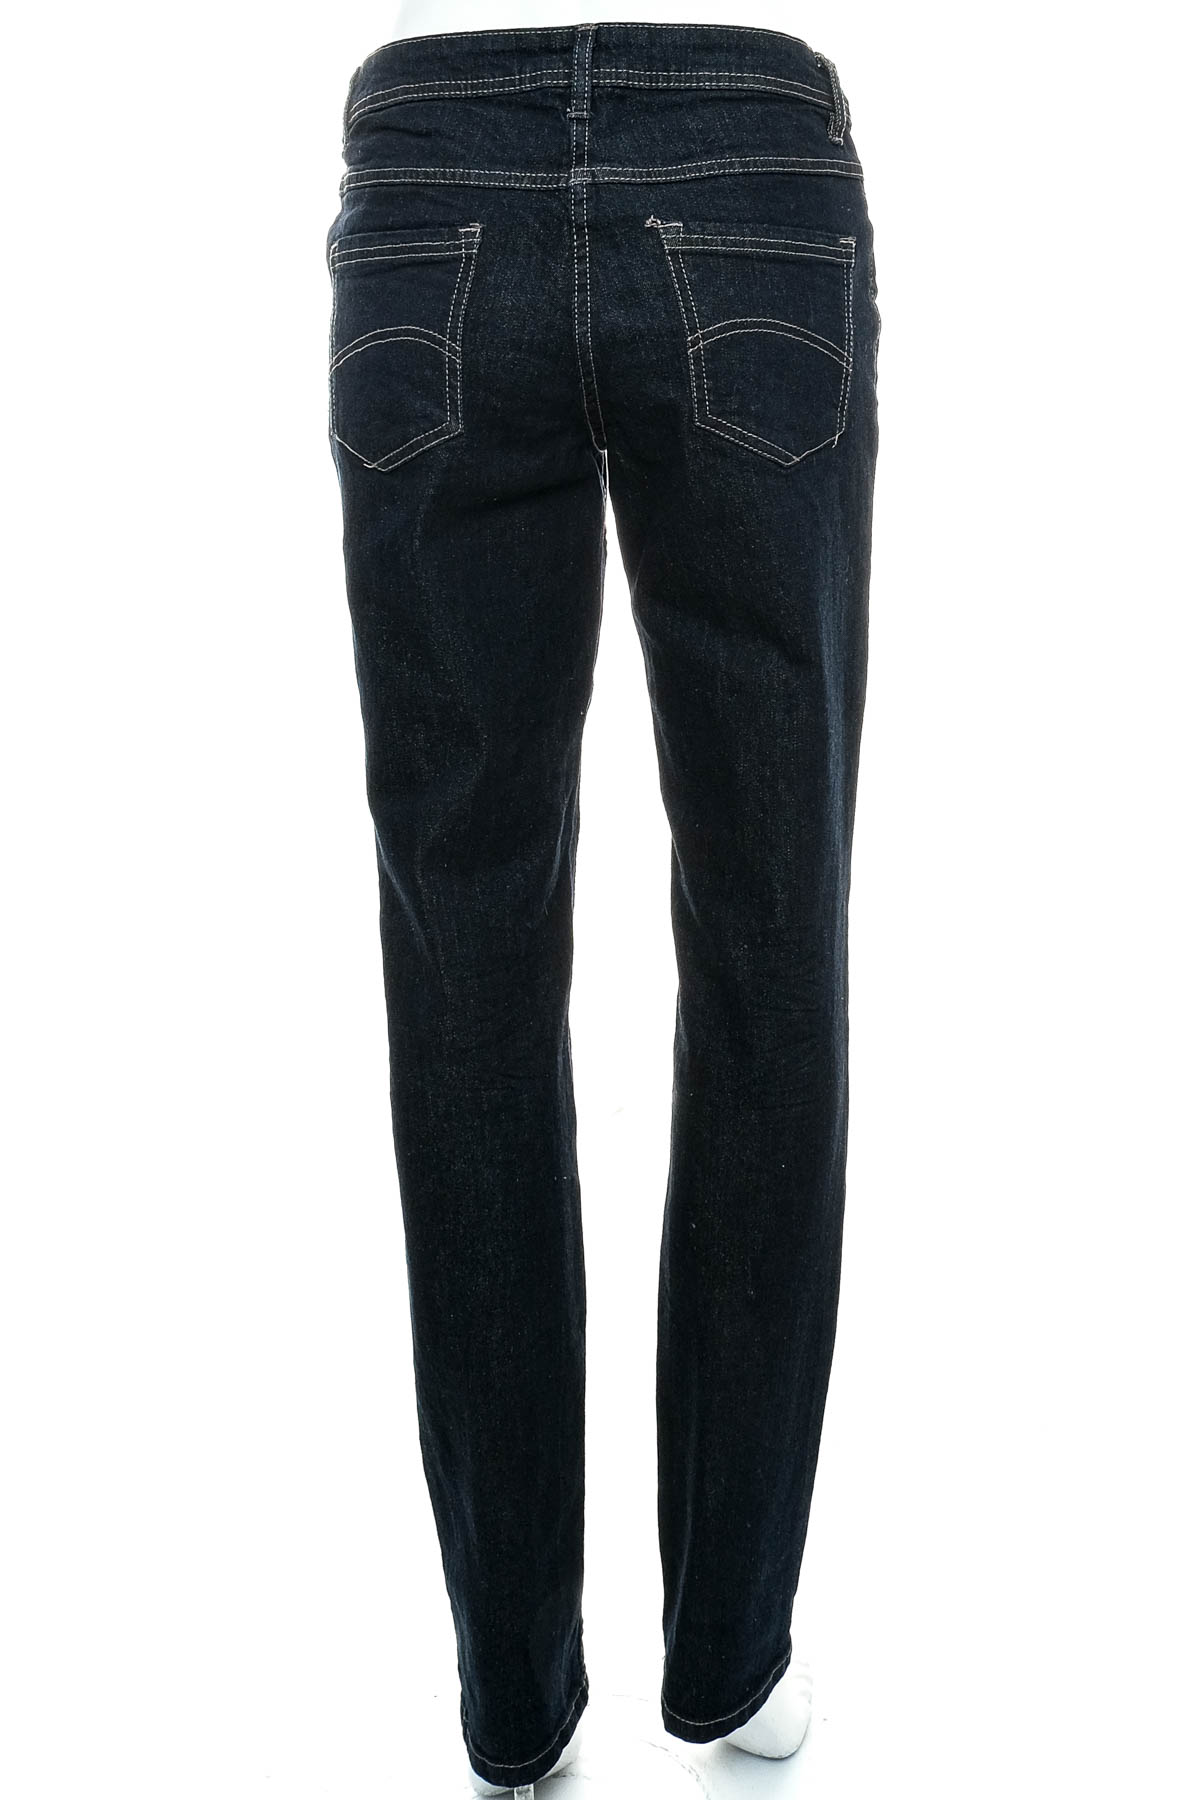 Women's jeans - UP2FASHION - 1